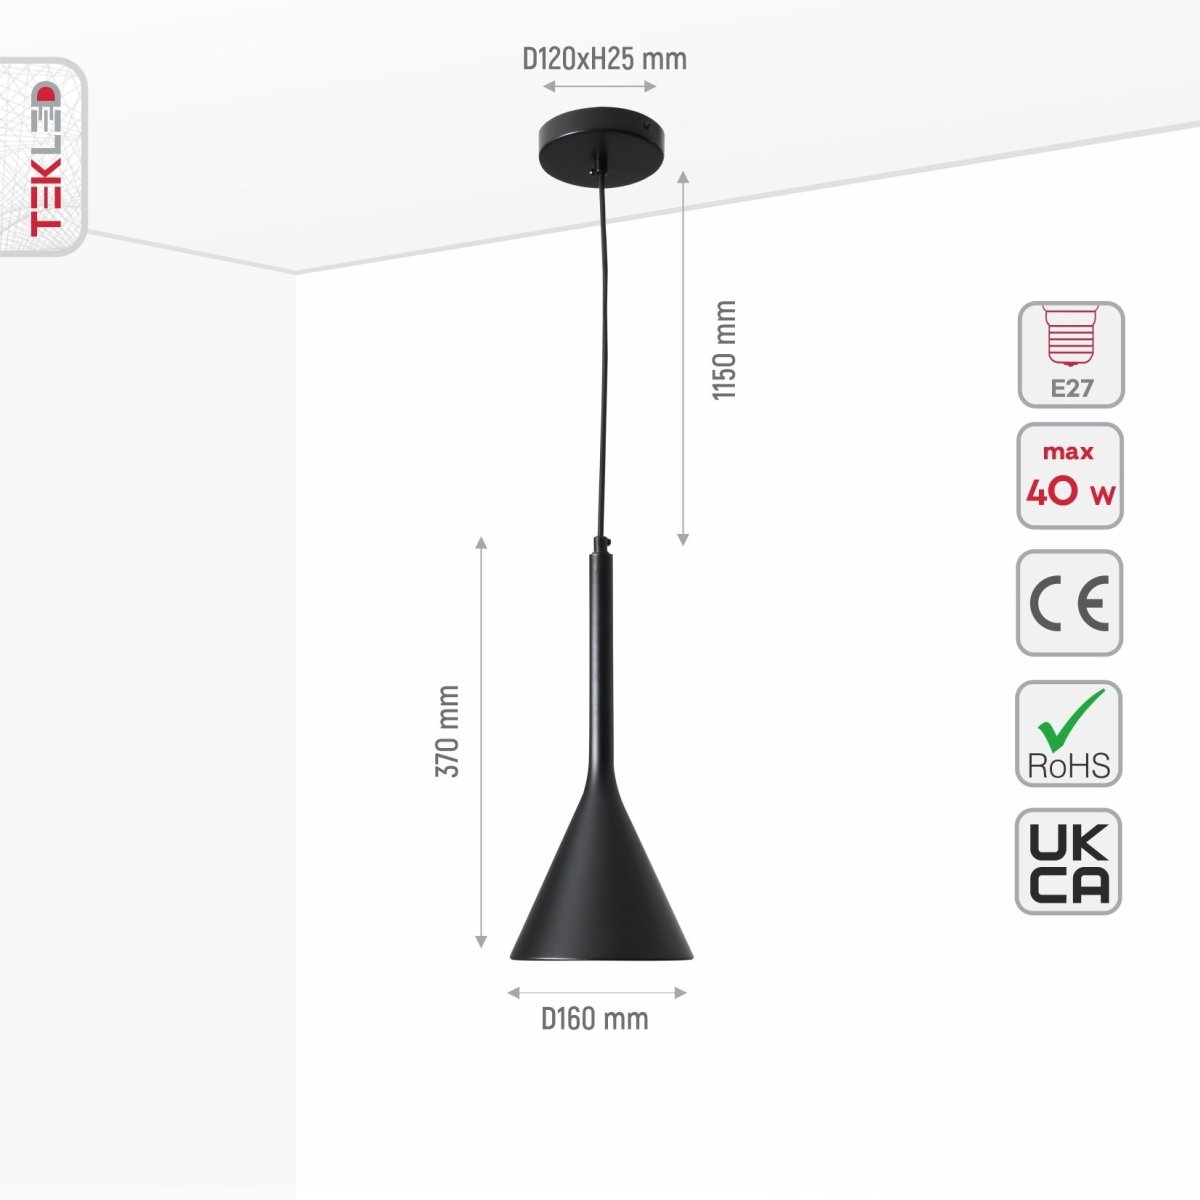 Size and specs of Black Funnel Nordic Modern Metal Ceiling Pendant Light with E27 Fitting | TEKLED 150-18394